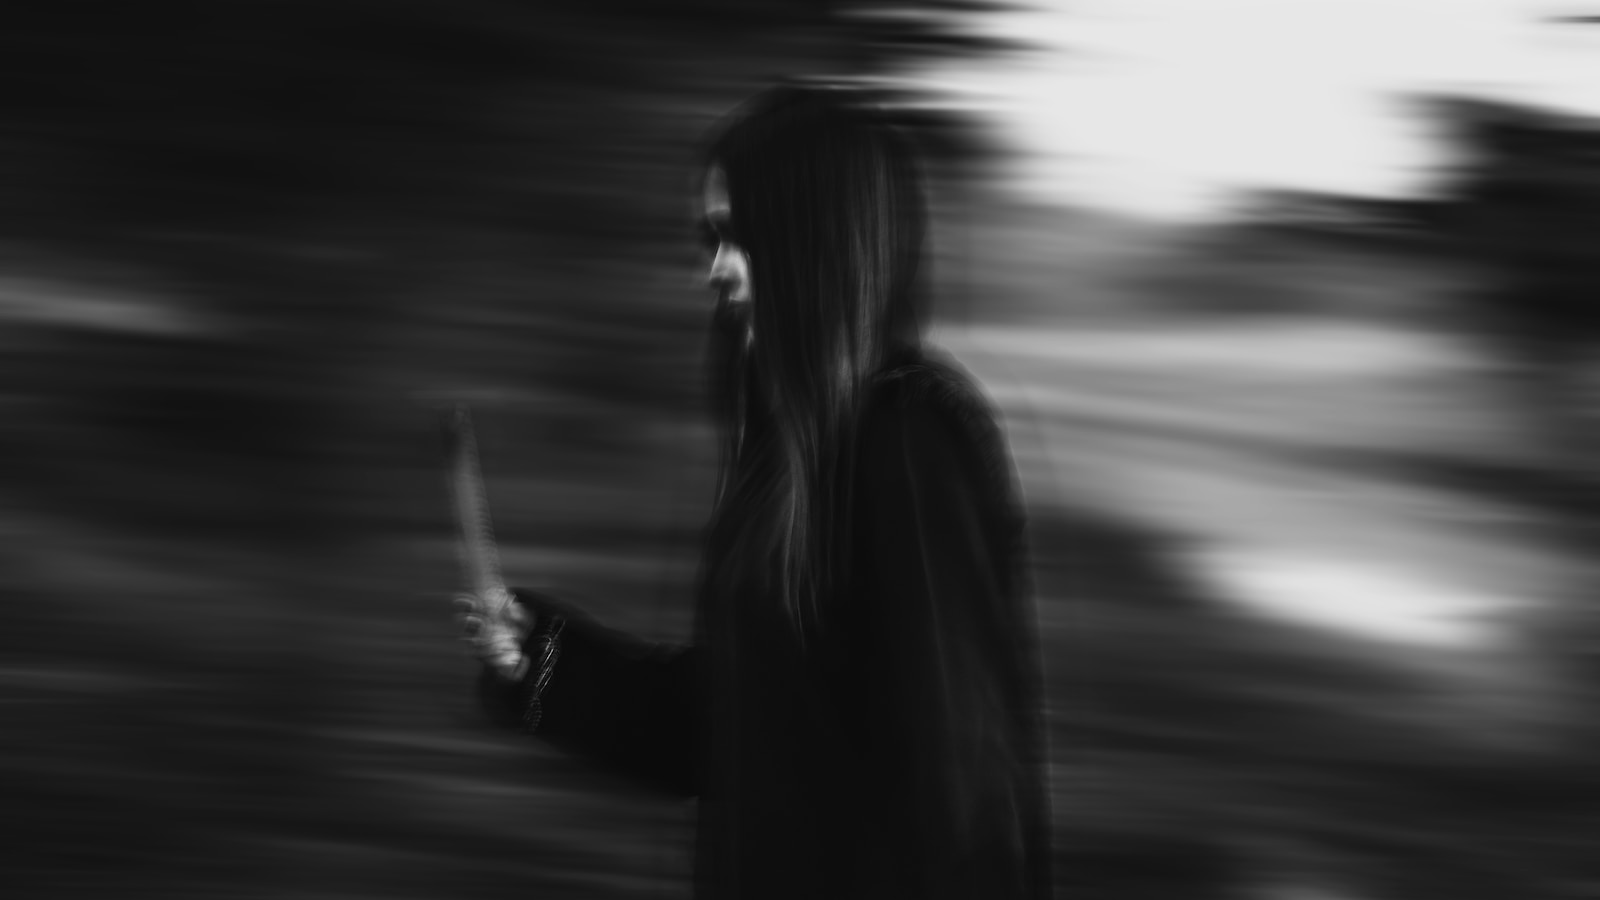 woman in black coat standing on road during daytime